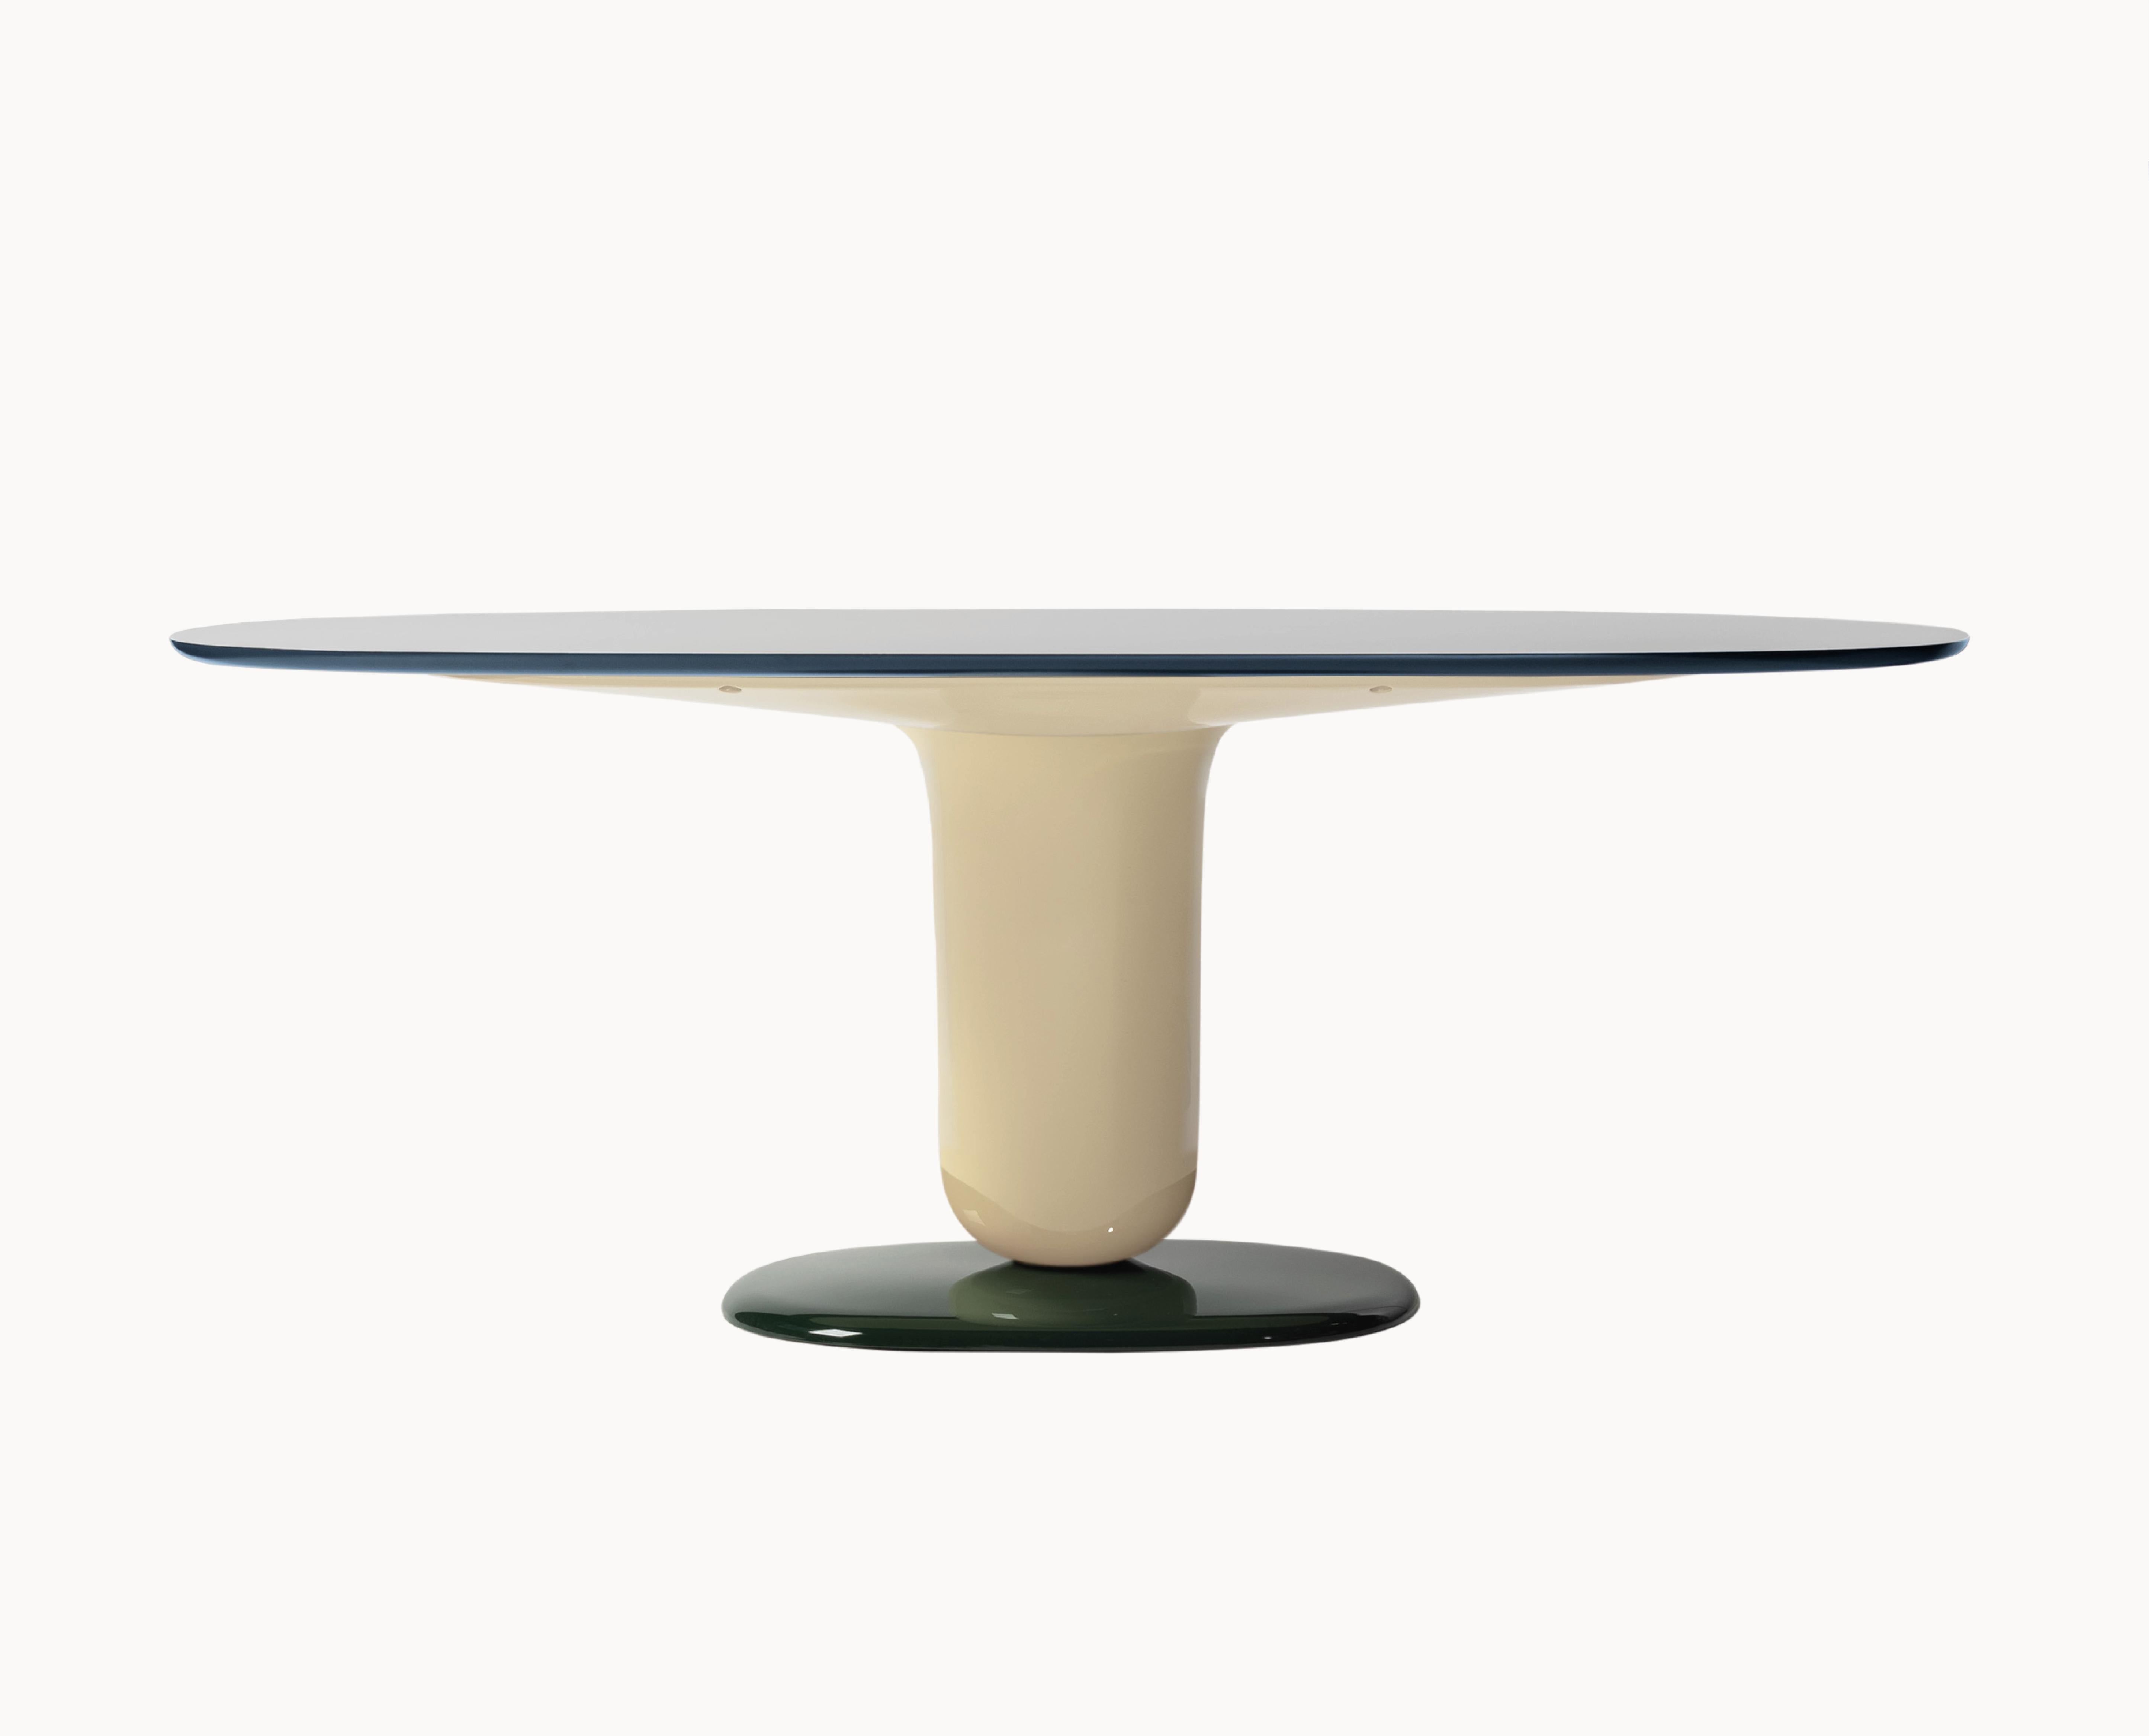 Explorer Dining Table by Jaime Hayon, 2023
Model Multicolor Ivory - EXPLORER 5A (190 CM)
Dimensions: W. 190 x D. 90 x H. 73.5 cm (92,1x19,6x57,9”)

Finishes combinations: 
- Multicolor Blue: Laminated top Grey Perle, Underside top grey blue, Body